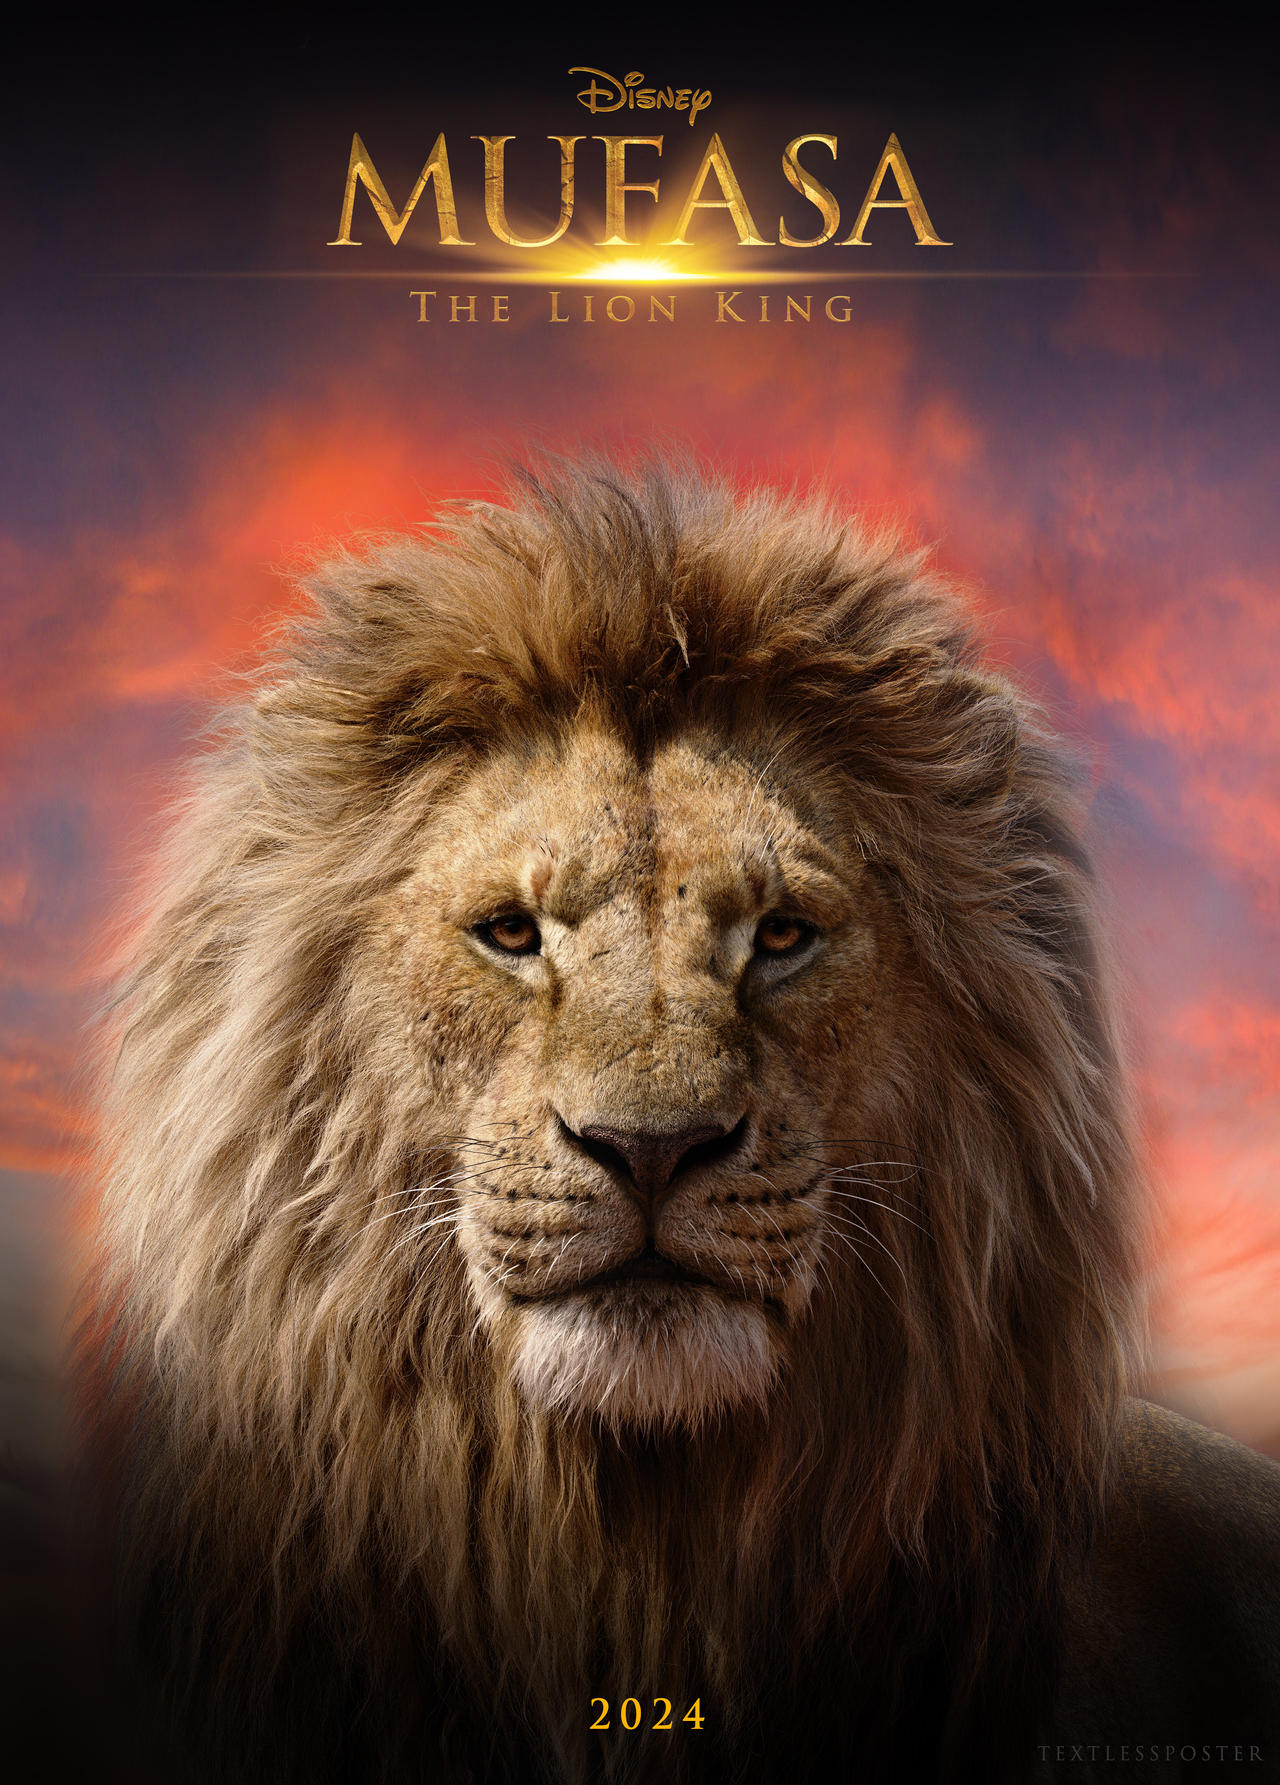 Mufasa The Lion King (2024) Fan Made Poster by HollywoodNewsIndia on